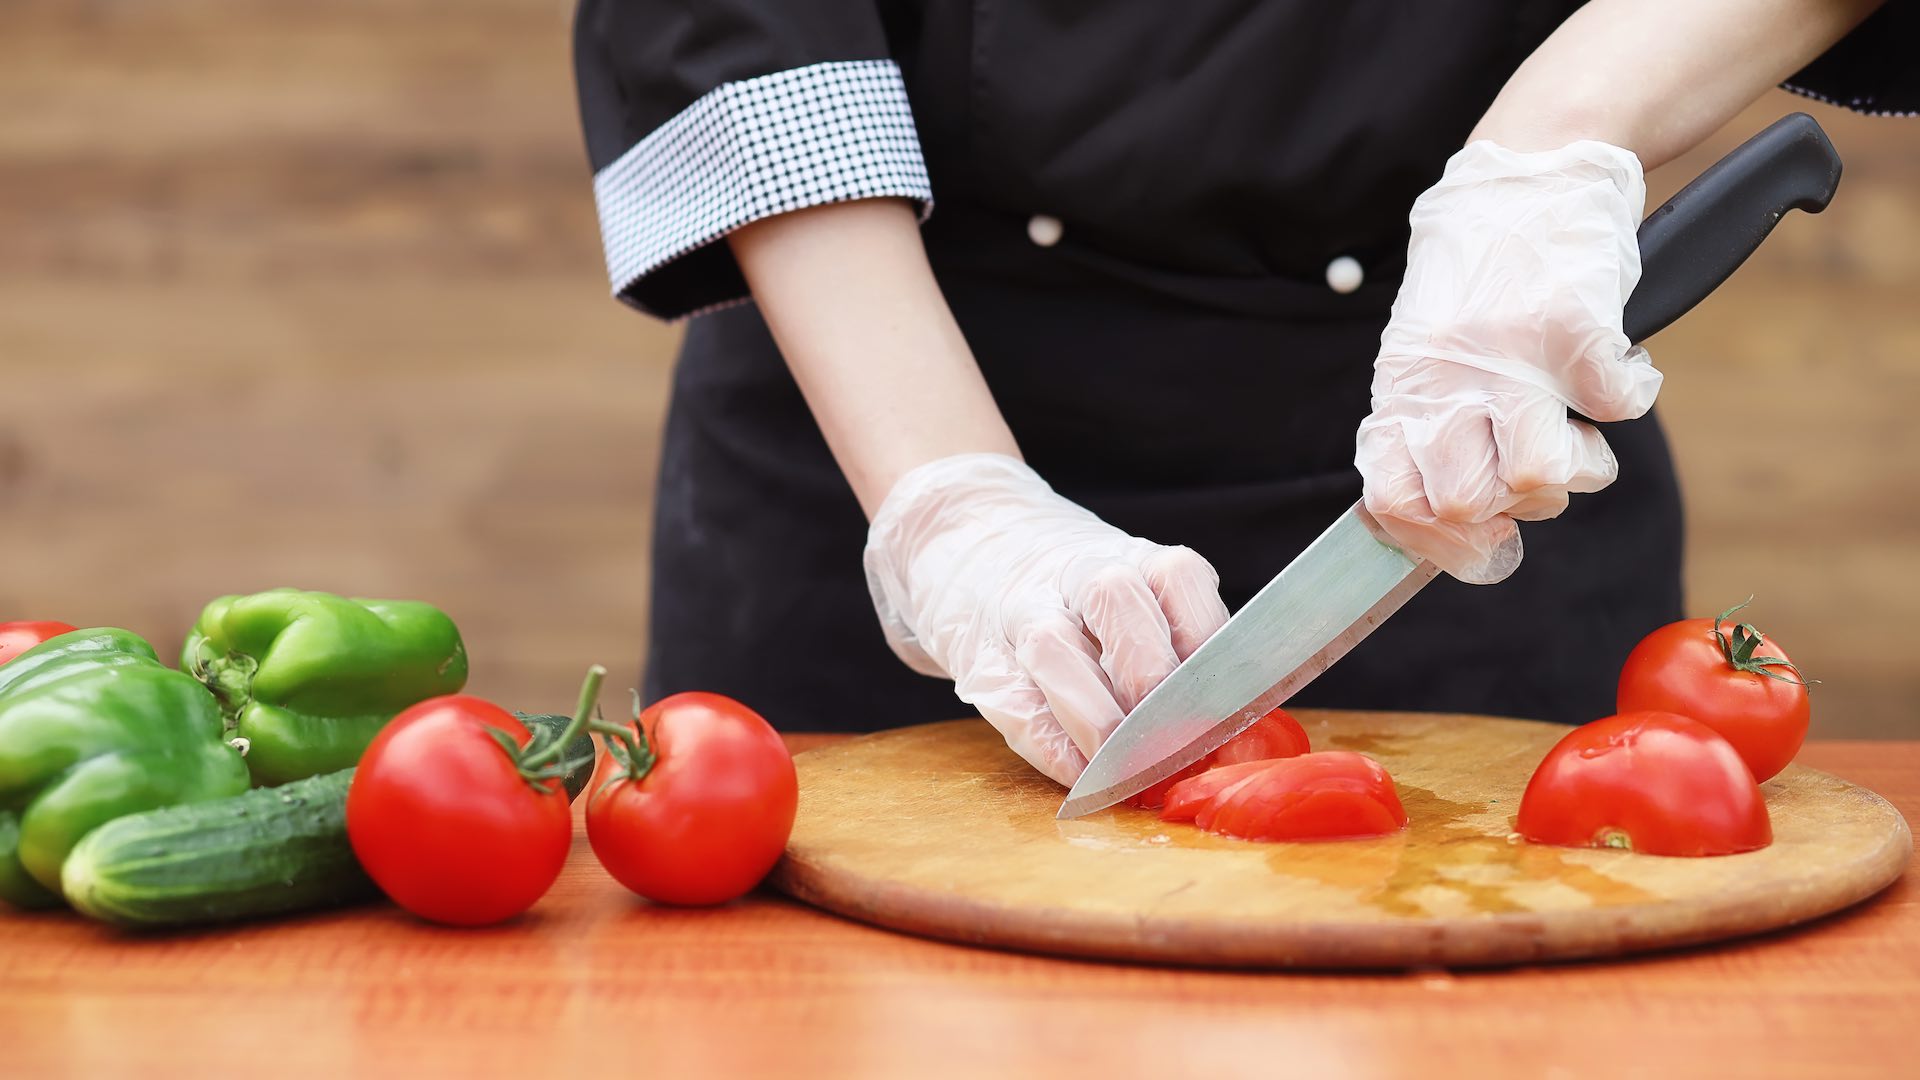 Toxicologist discusses the safety of plastic cutting boards amid new findings